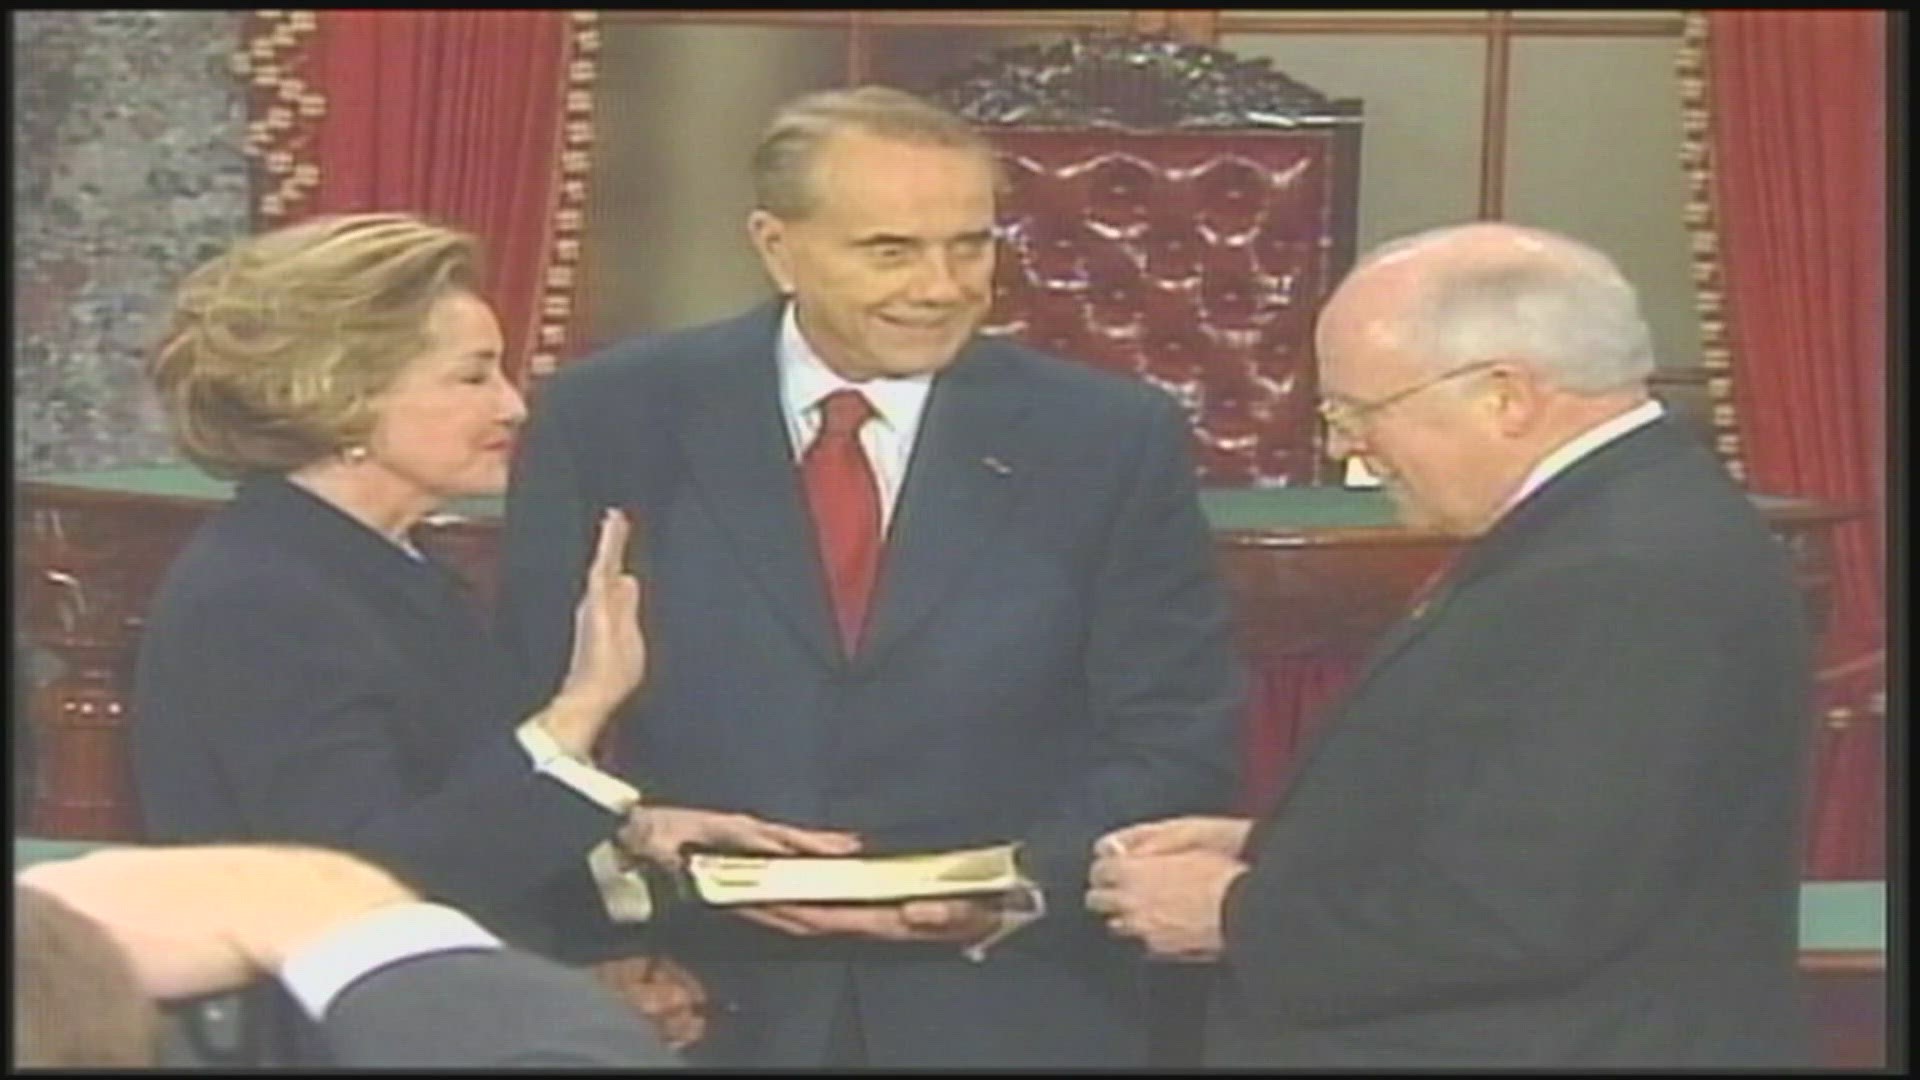 On this day, Dole became the first woman to represent NC in the senate.